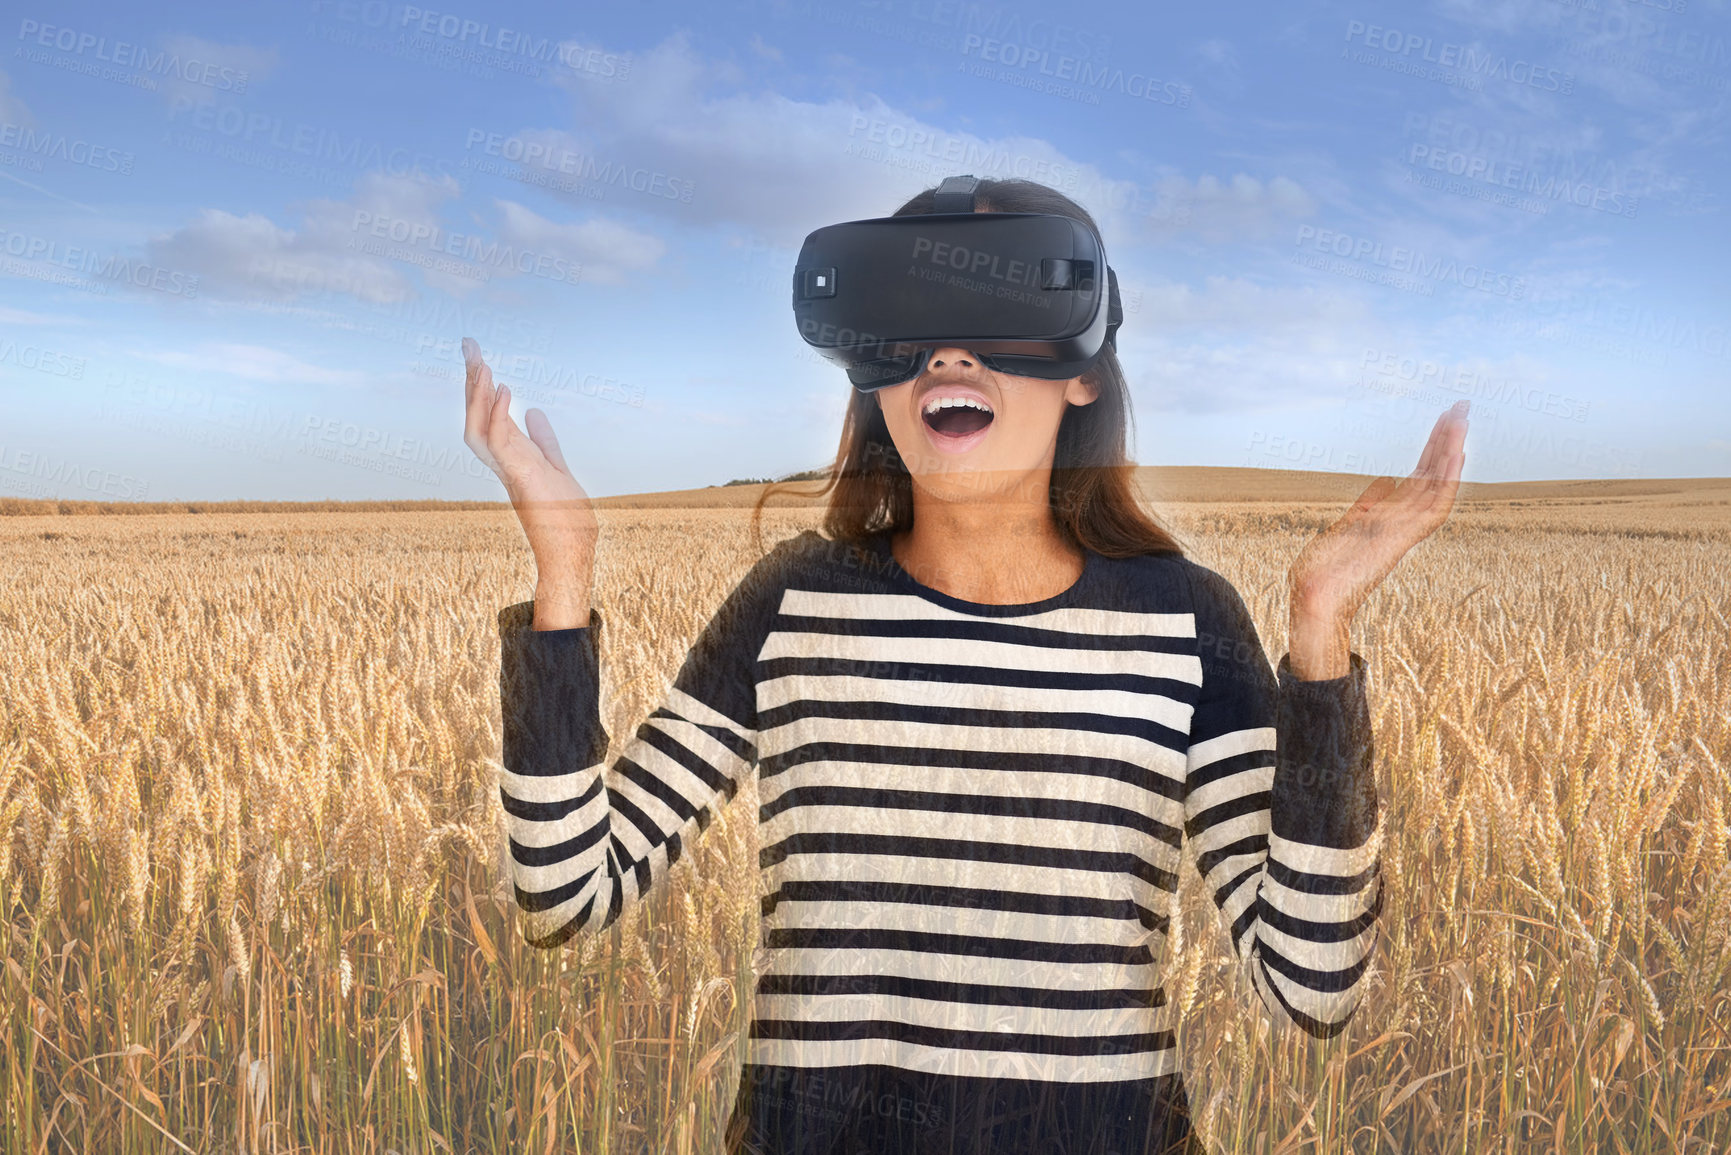 Buy stock photo Shot of a young woman wearing a VR headset superimposed over a wheat field landscape